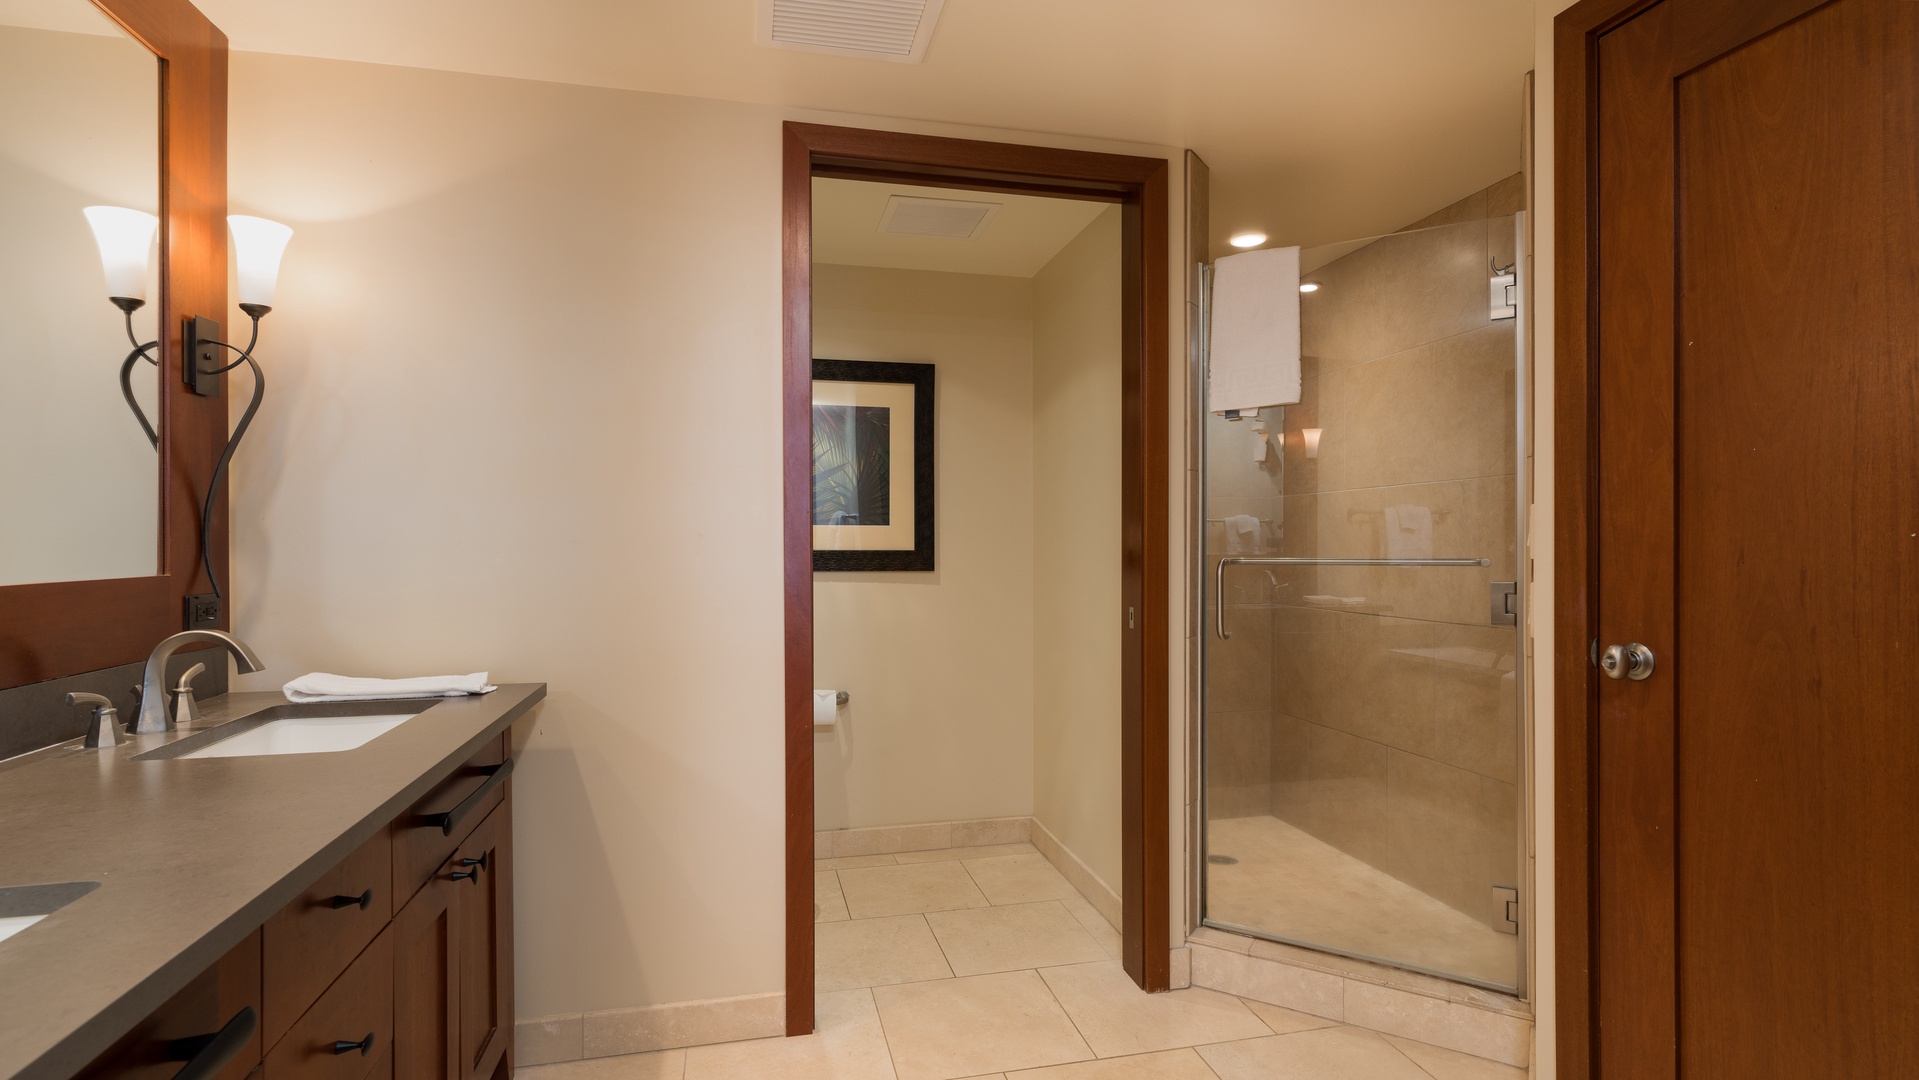 Kapolei Vacation Rentals, Ko Olina Beach Villas B310 - The primary guest bathroom features a walk-in shower and soaking tub.